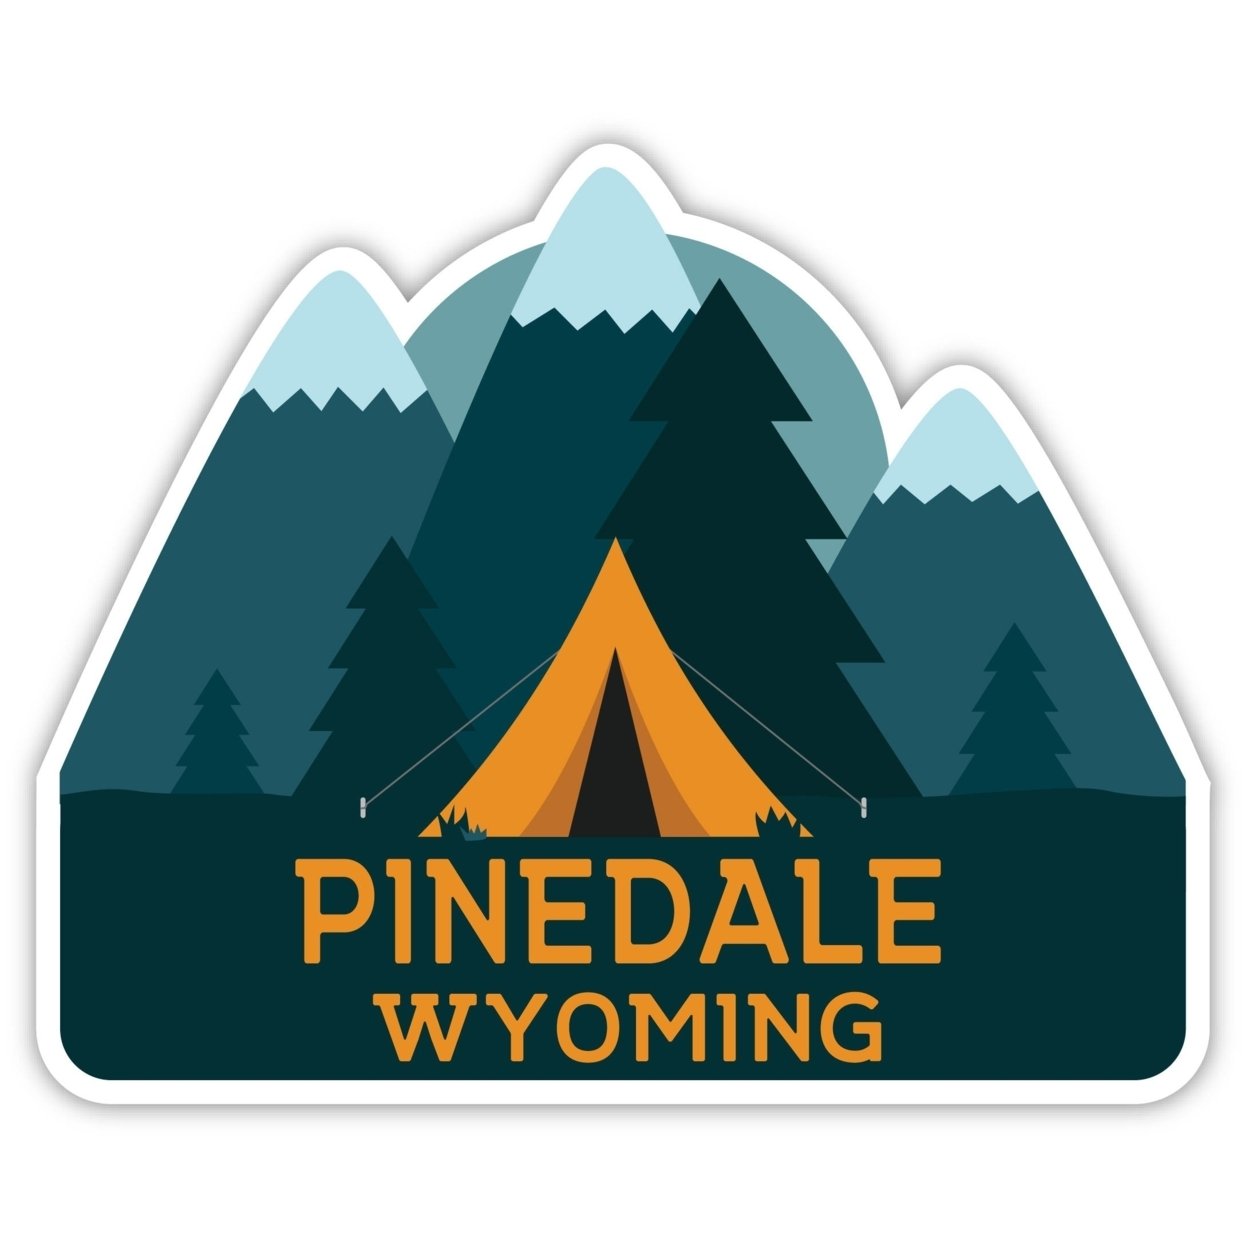 Pinedale Wyoming Souvenir Decorative Stickers (Choose Theme And Size) - Single Unit, 4-Inch, Tent